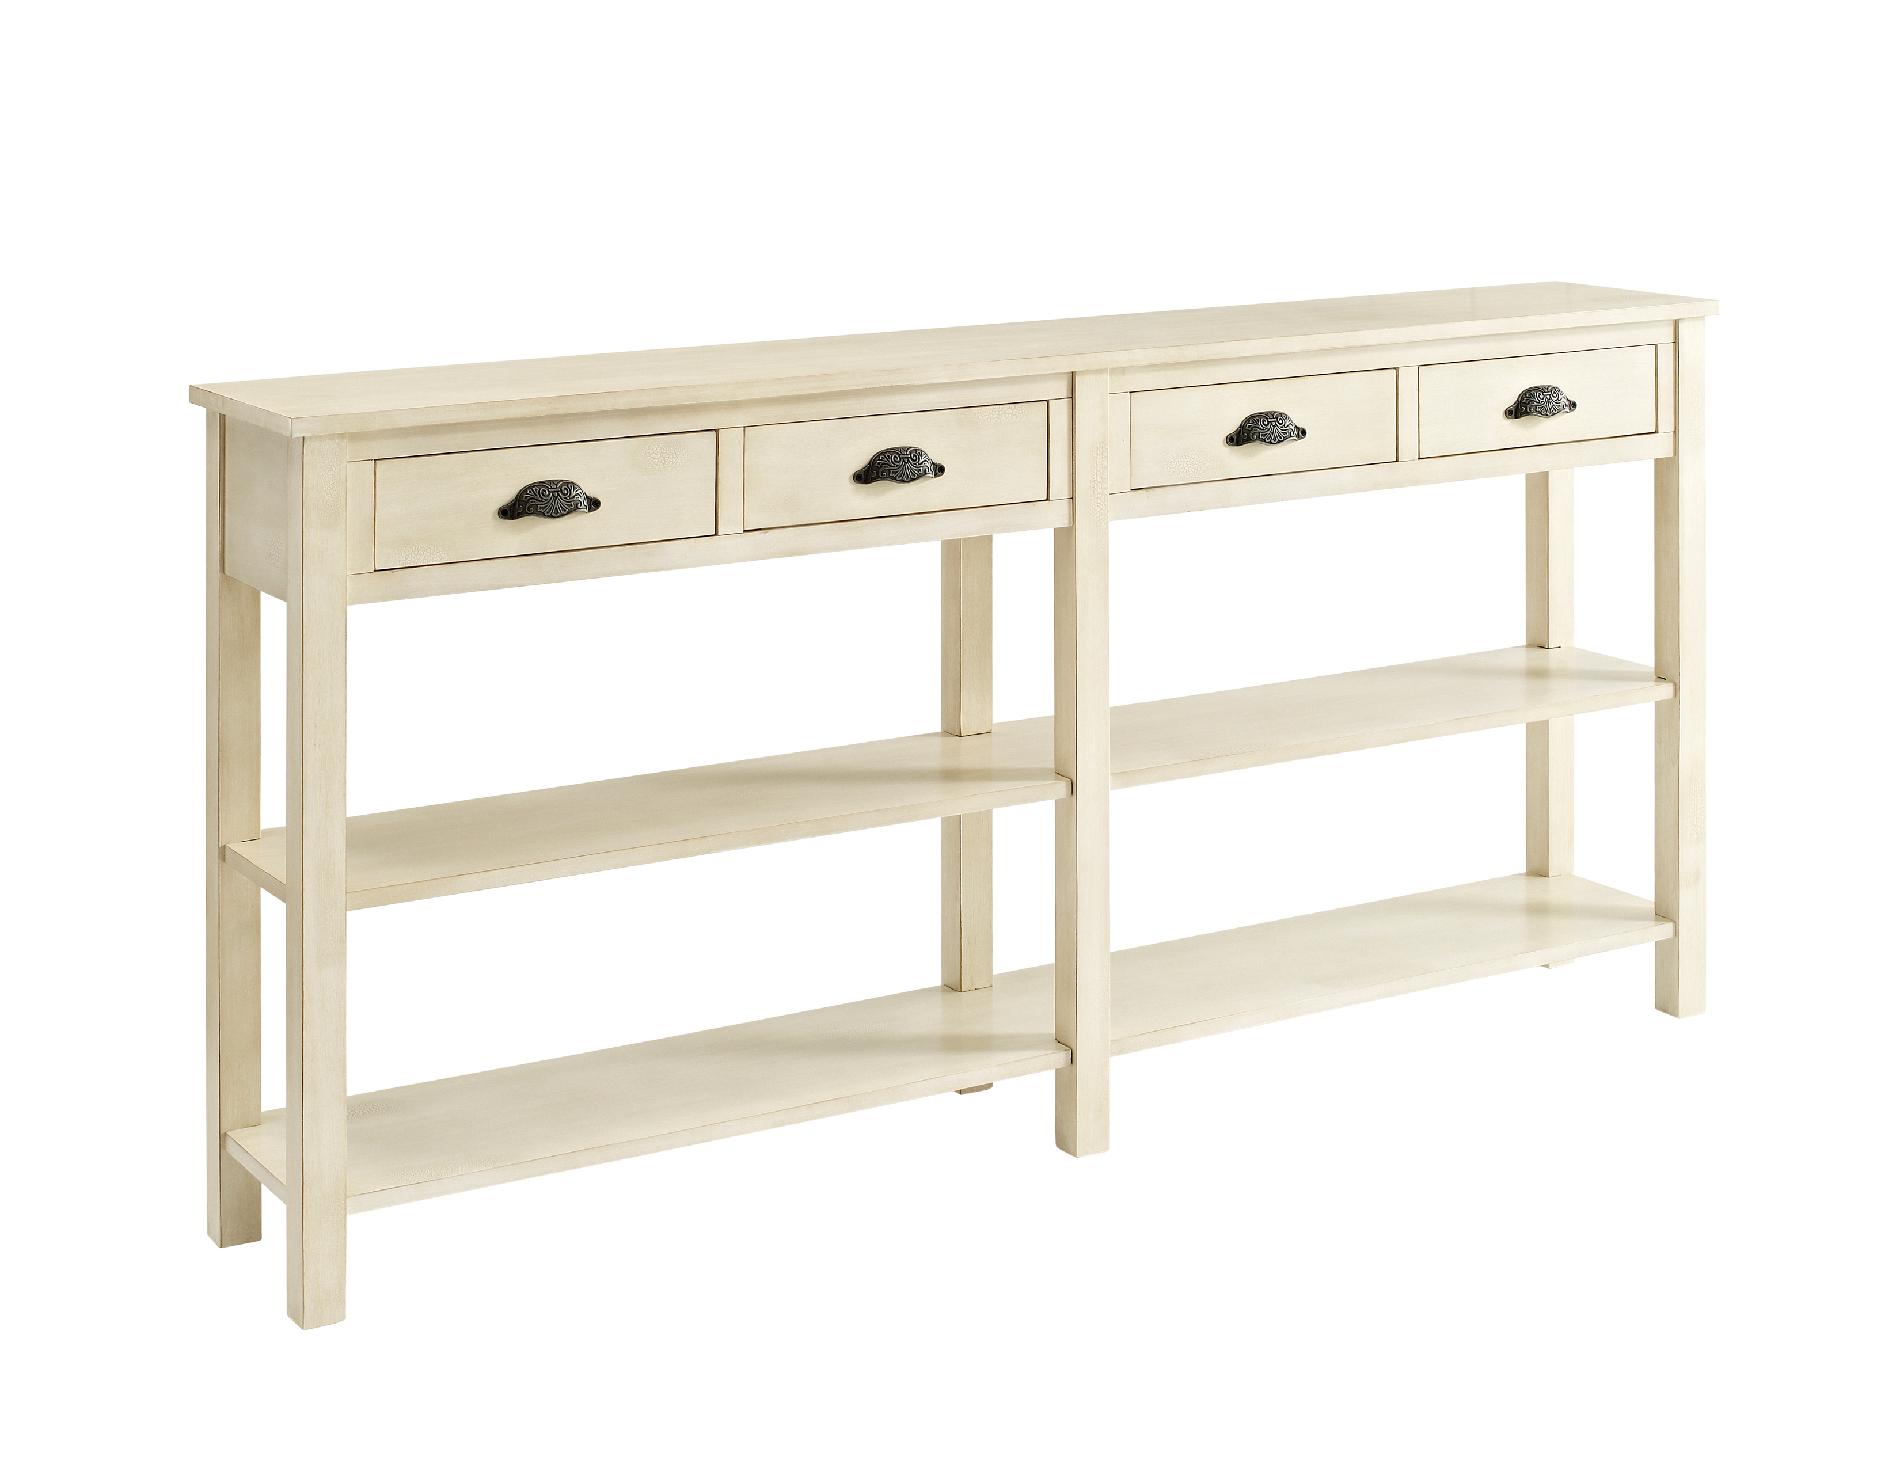 L Powell Cream Crackle Console